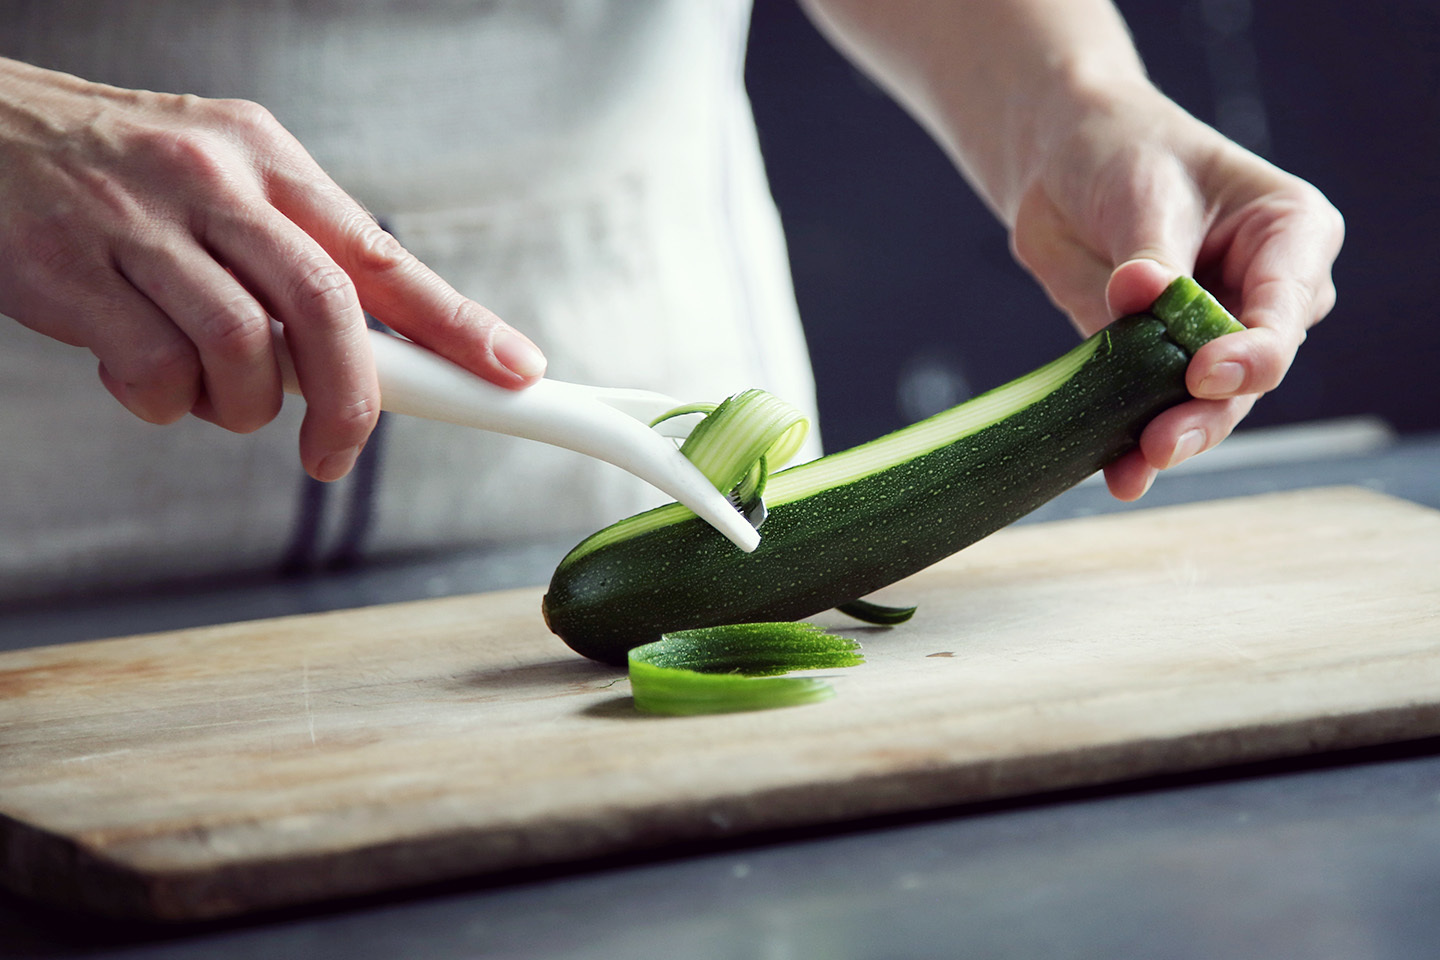 Hands using a paring tool to remove outer skin from a green zucchini on a cutting board.